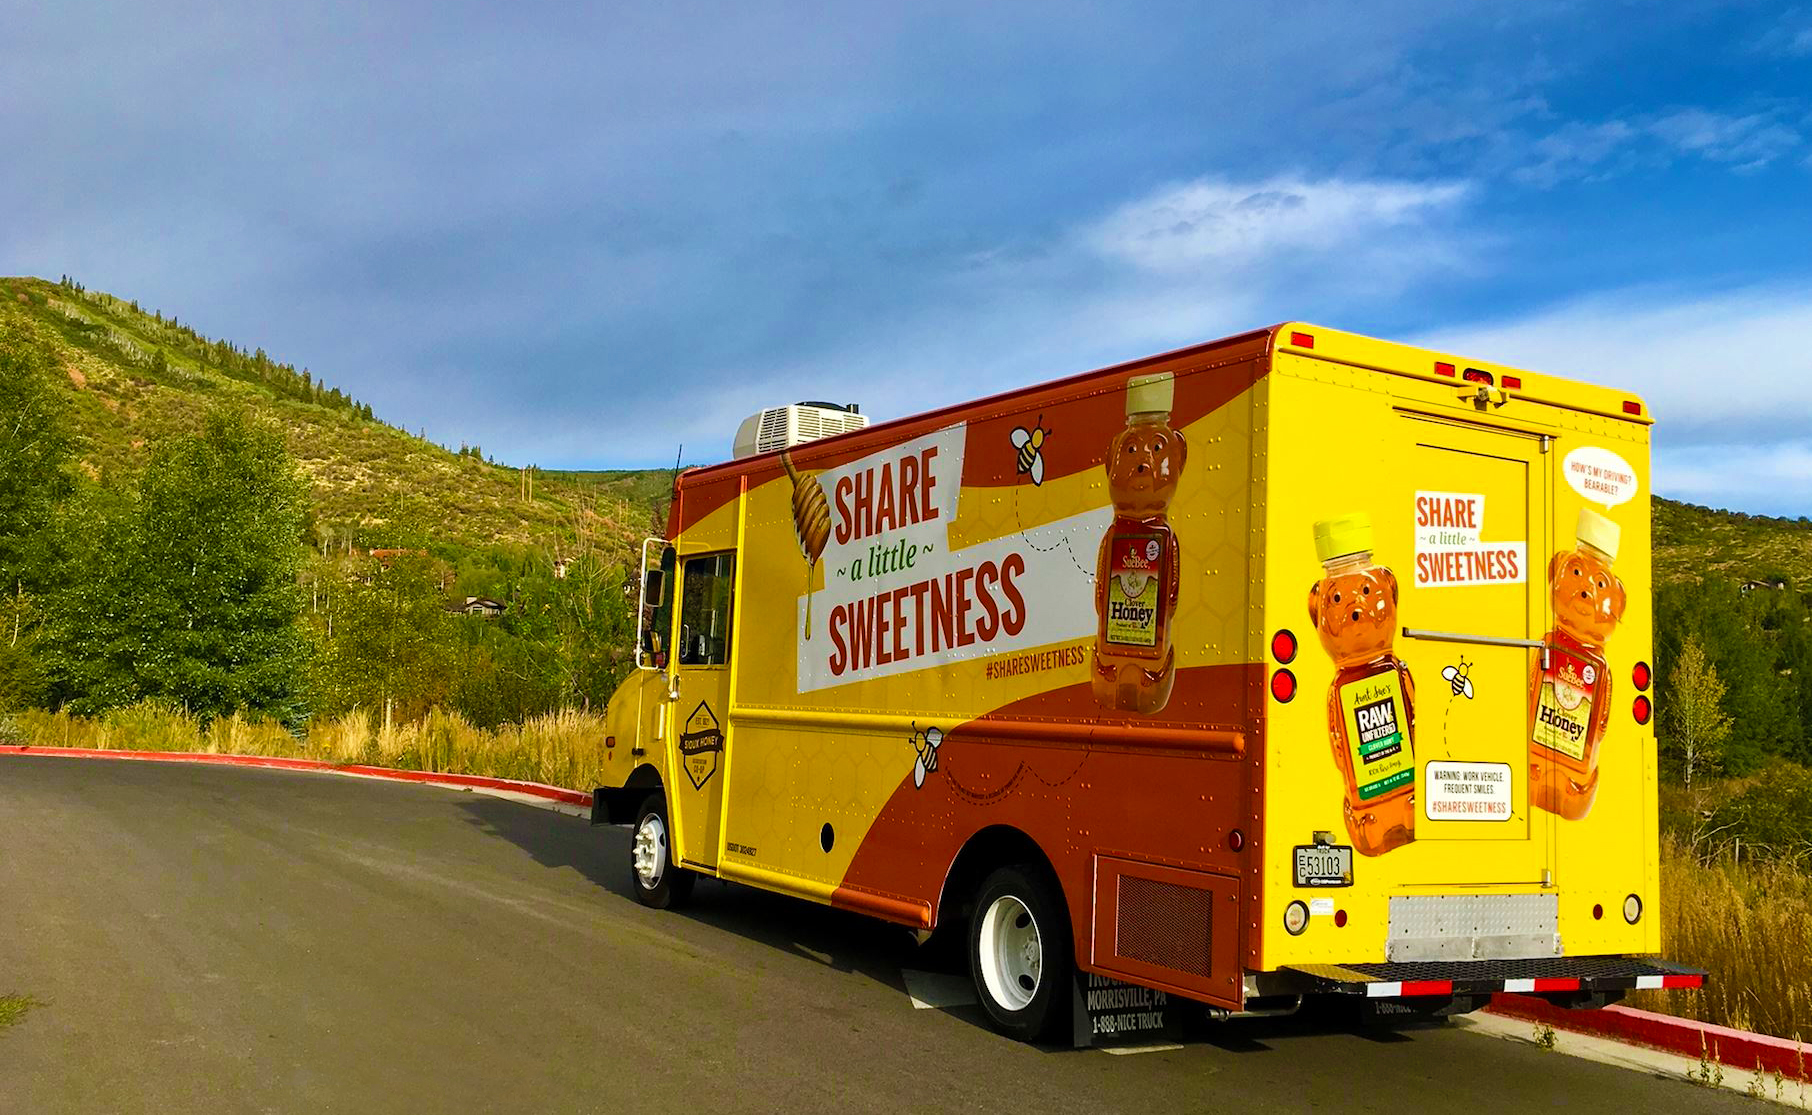 Share Sweetness Food Truck on the Road